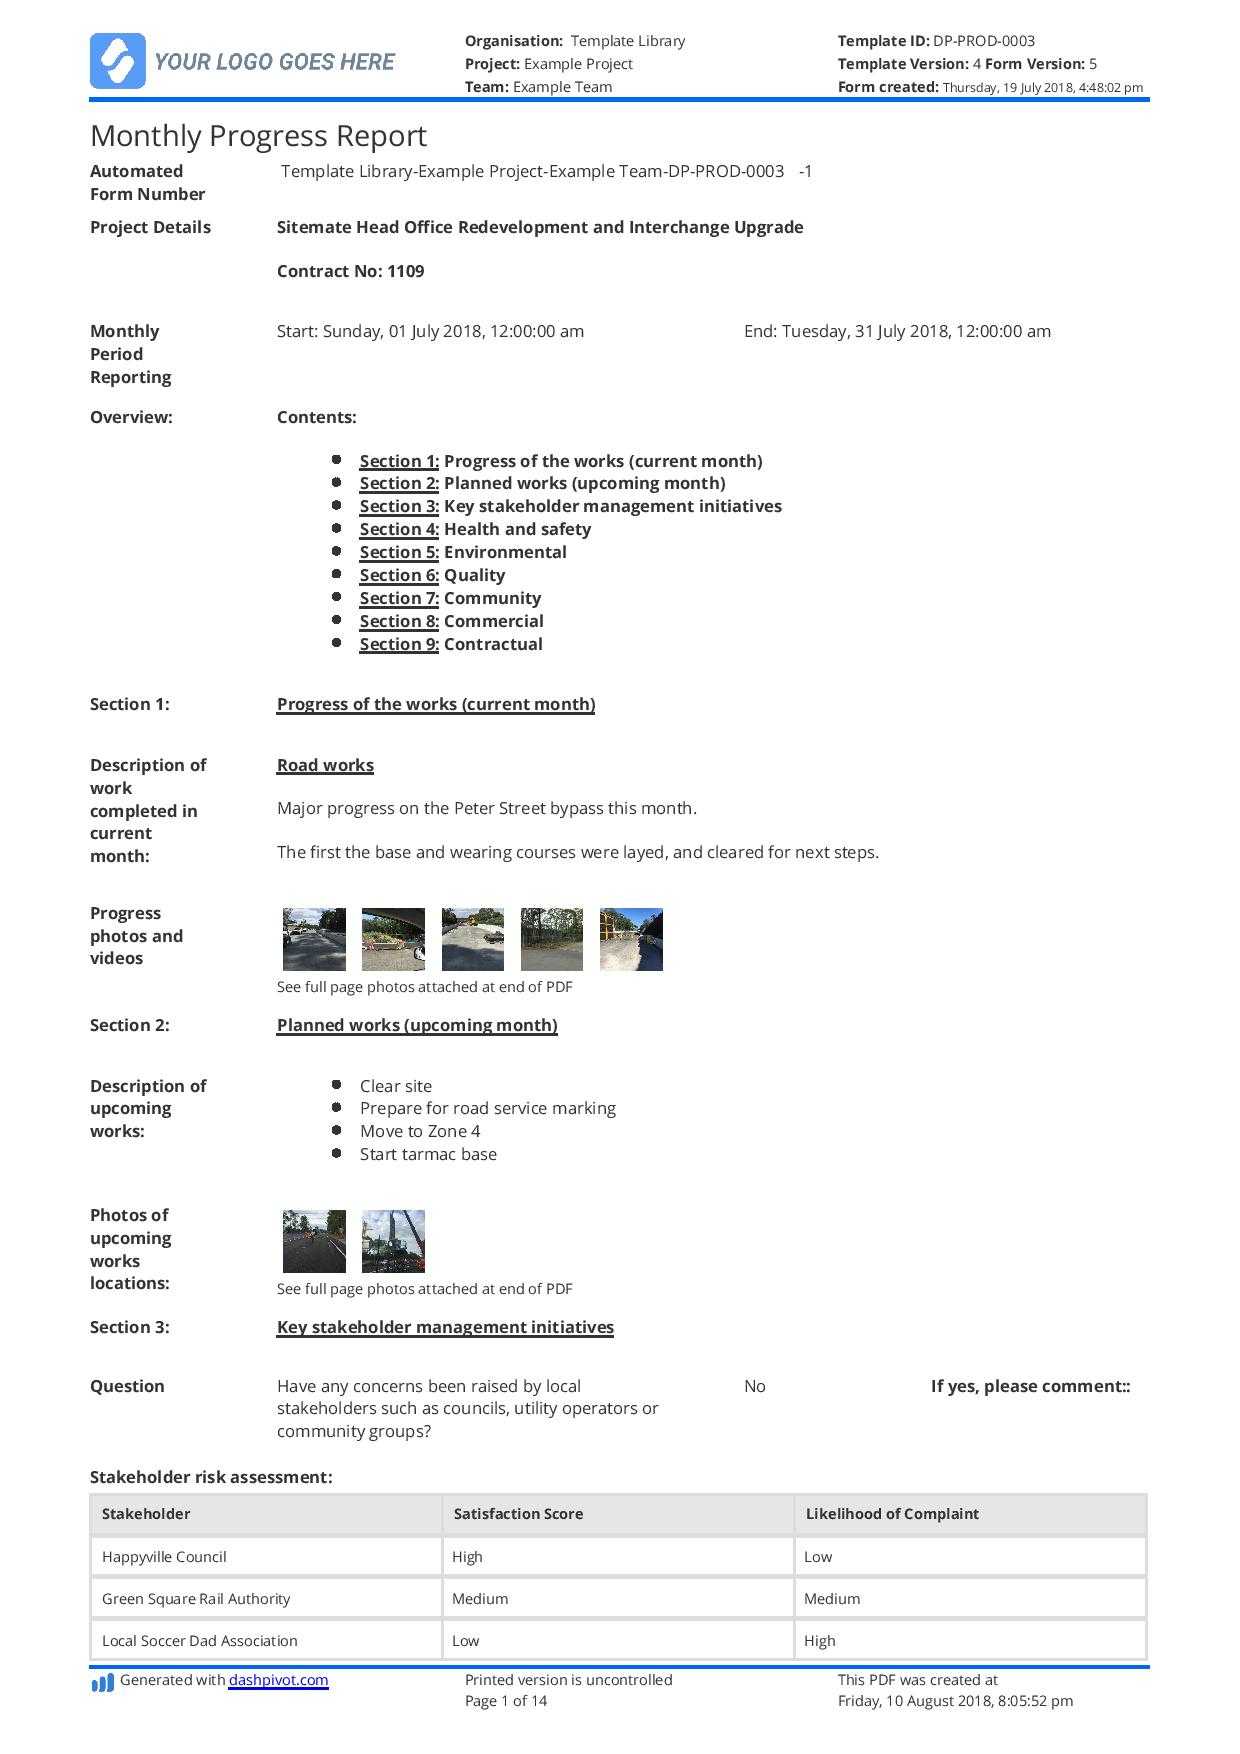 Monthly Construction Progress Report Template: Use This For Monthly Status Report Template